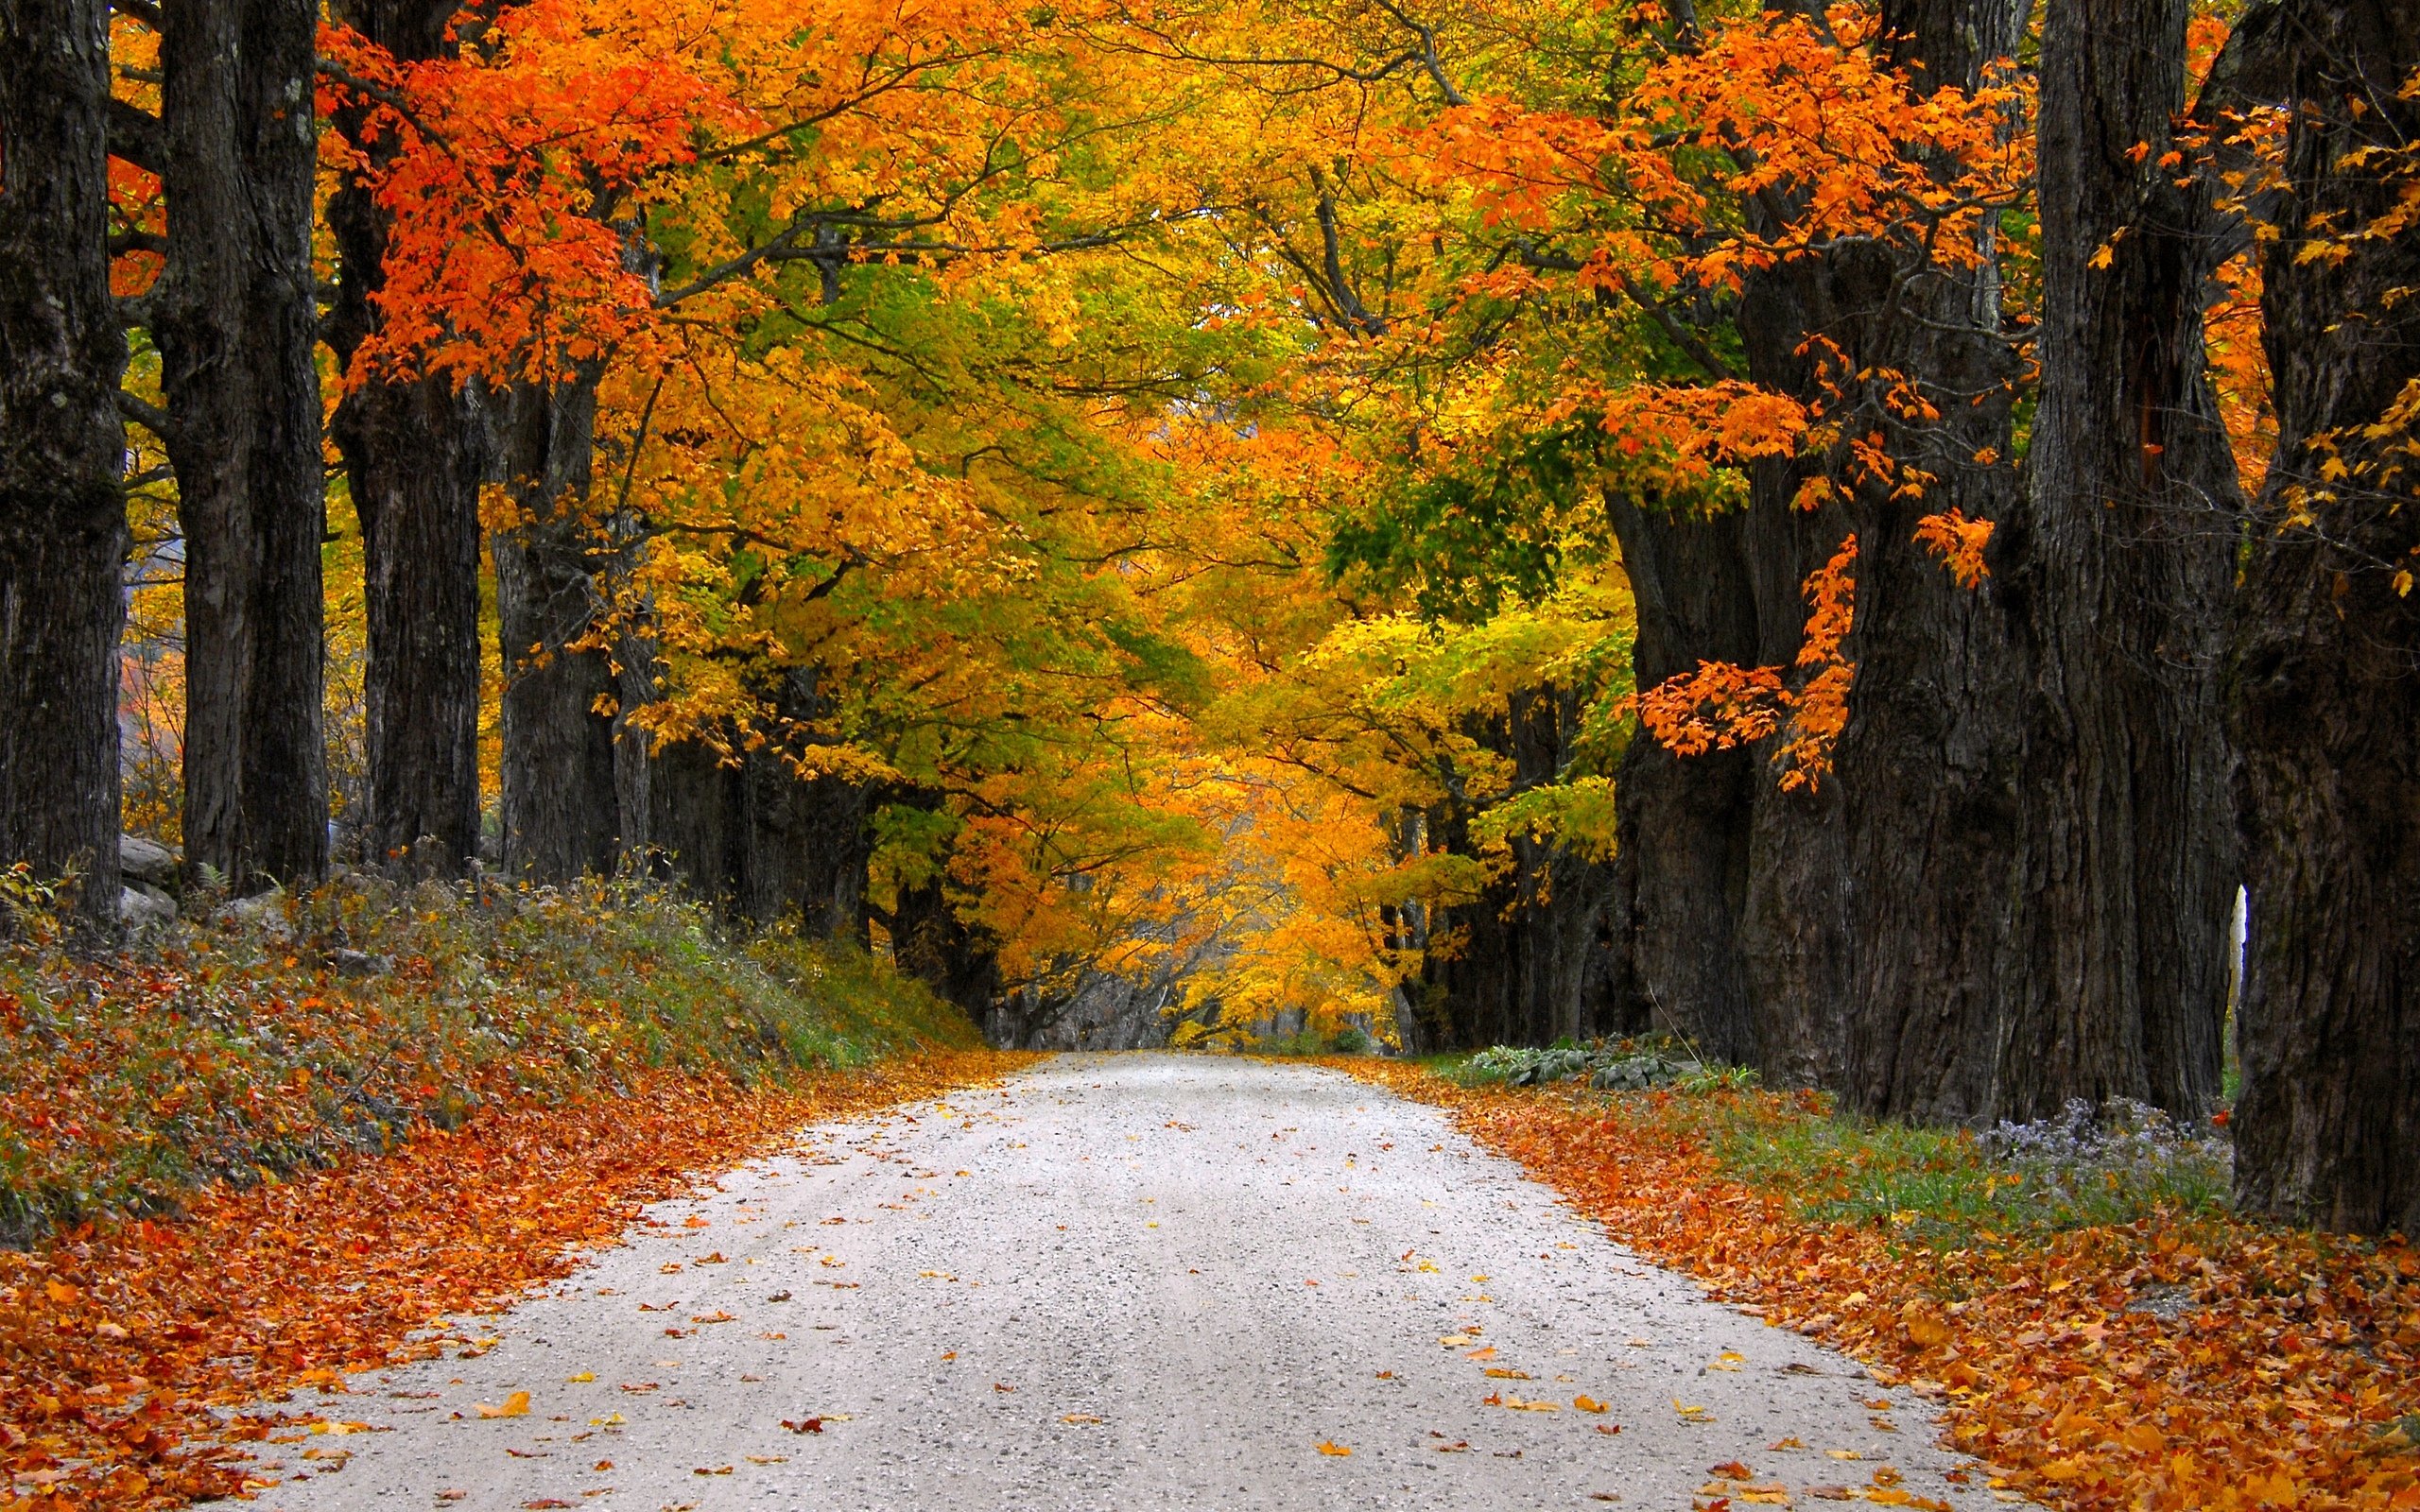 Road Surrounded By Trees With Colorful Leaves During Fall